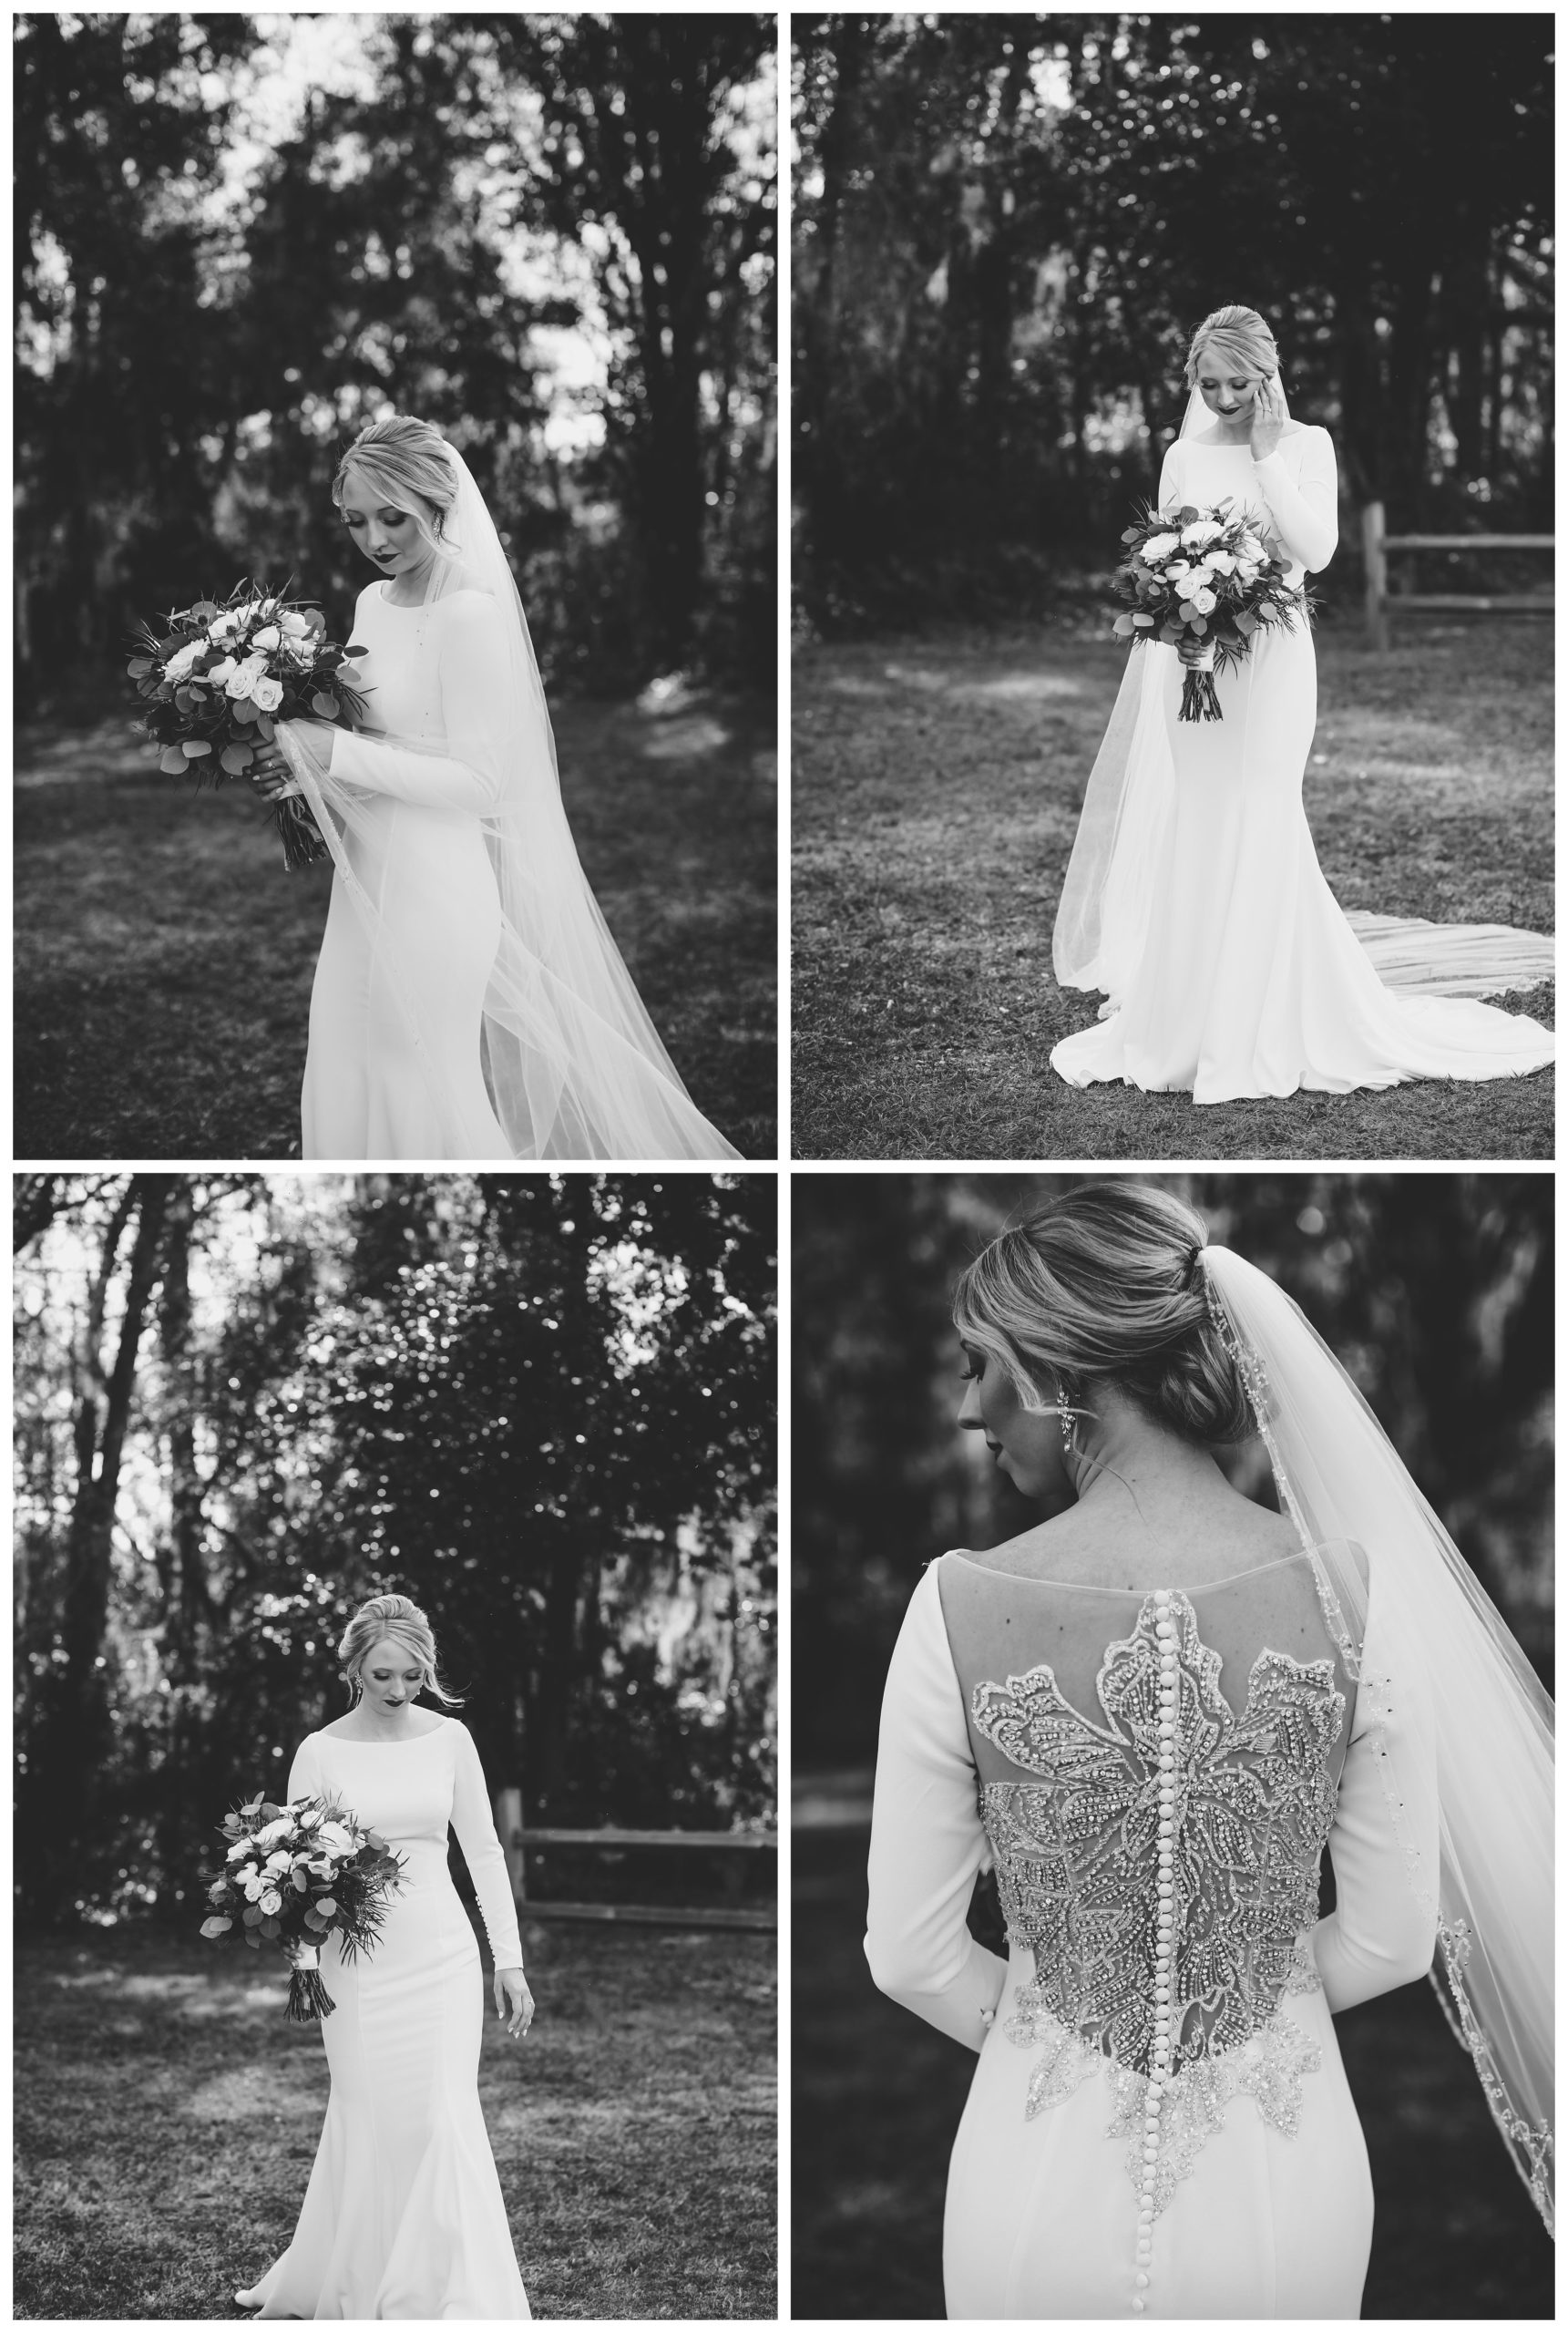 Black and white bridal portraits of bride with button up dress - Shelly Williams Photography